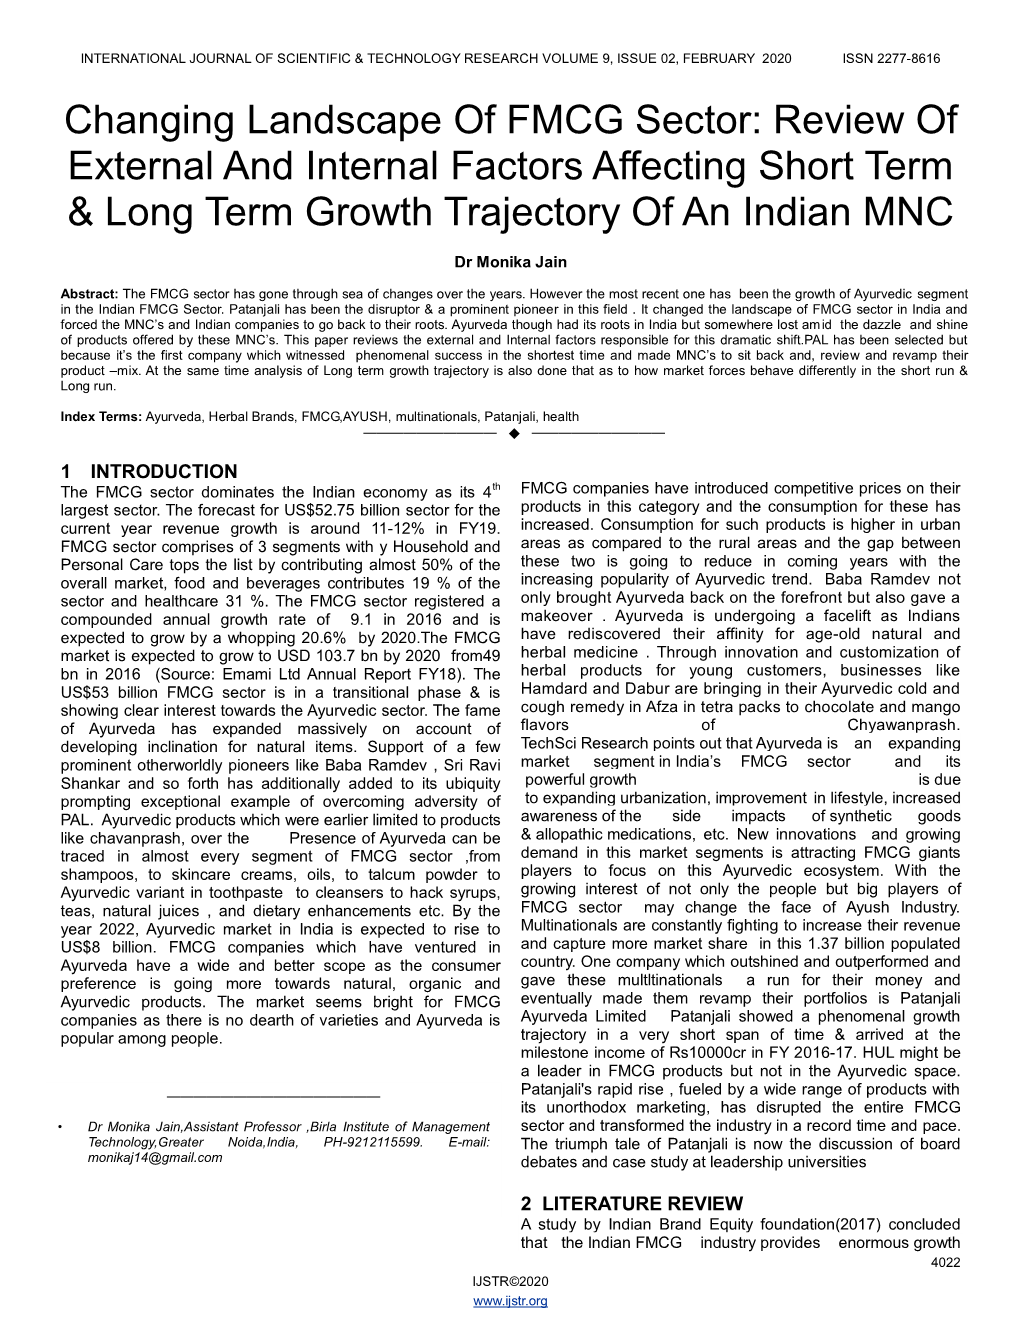 Changing Landscape of FMCG Sector: Review of External and Internal Factors Affecting Short Term & Long Term Growth Trajectory of an Indian MNC